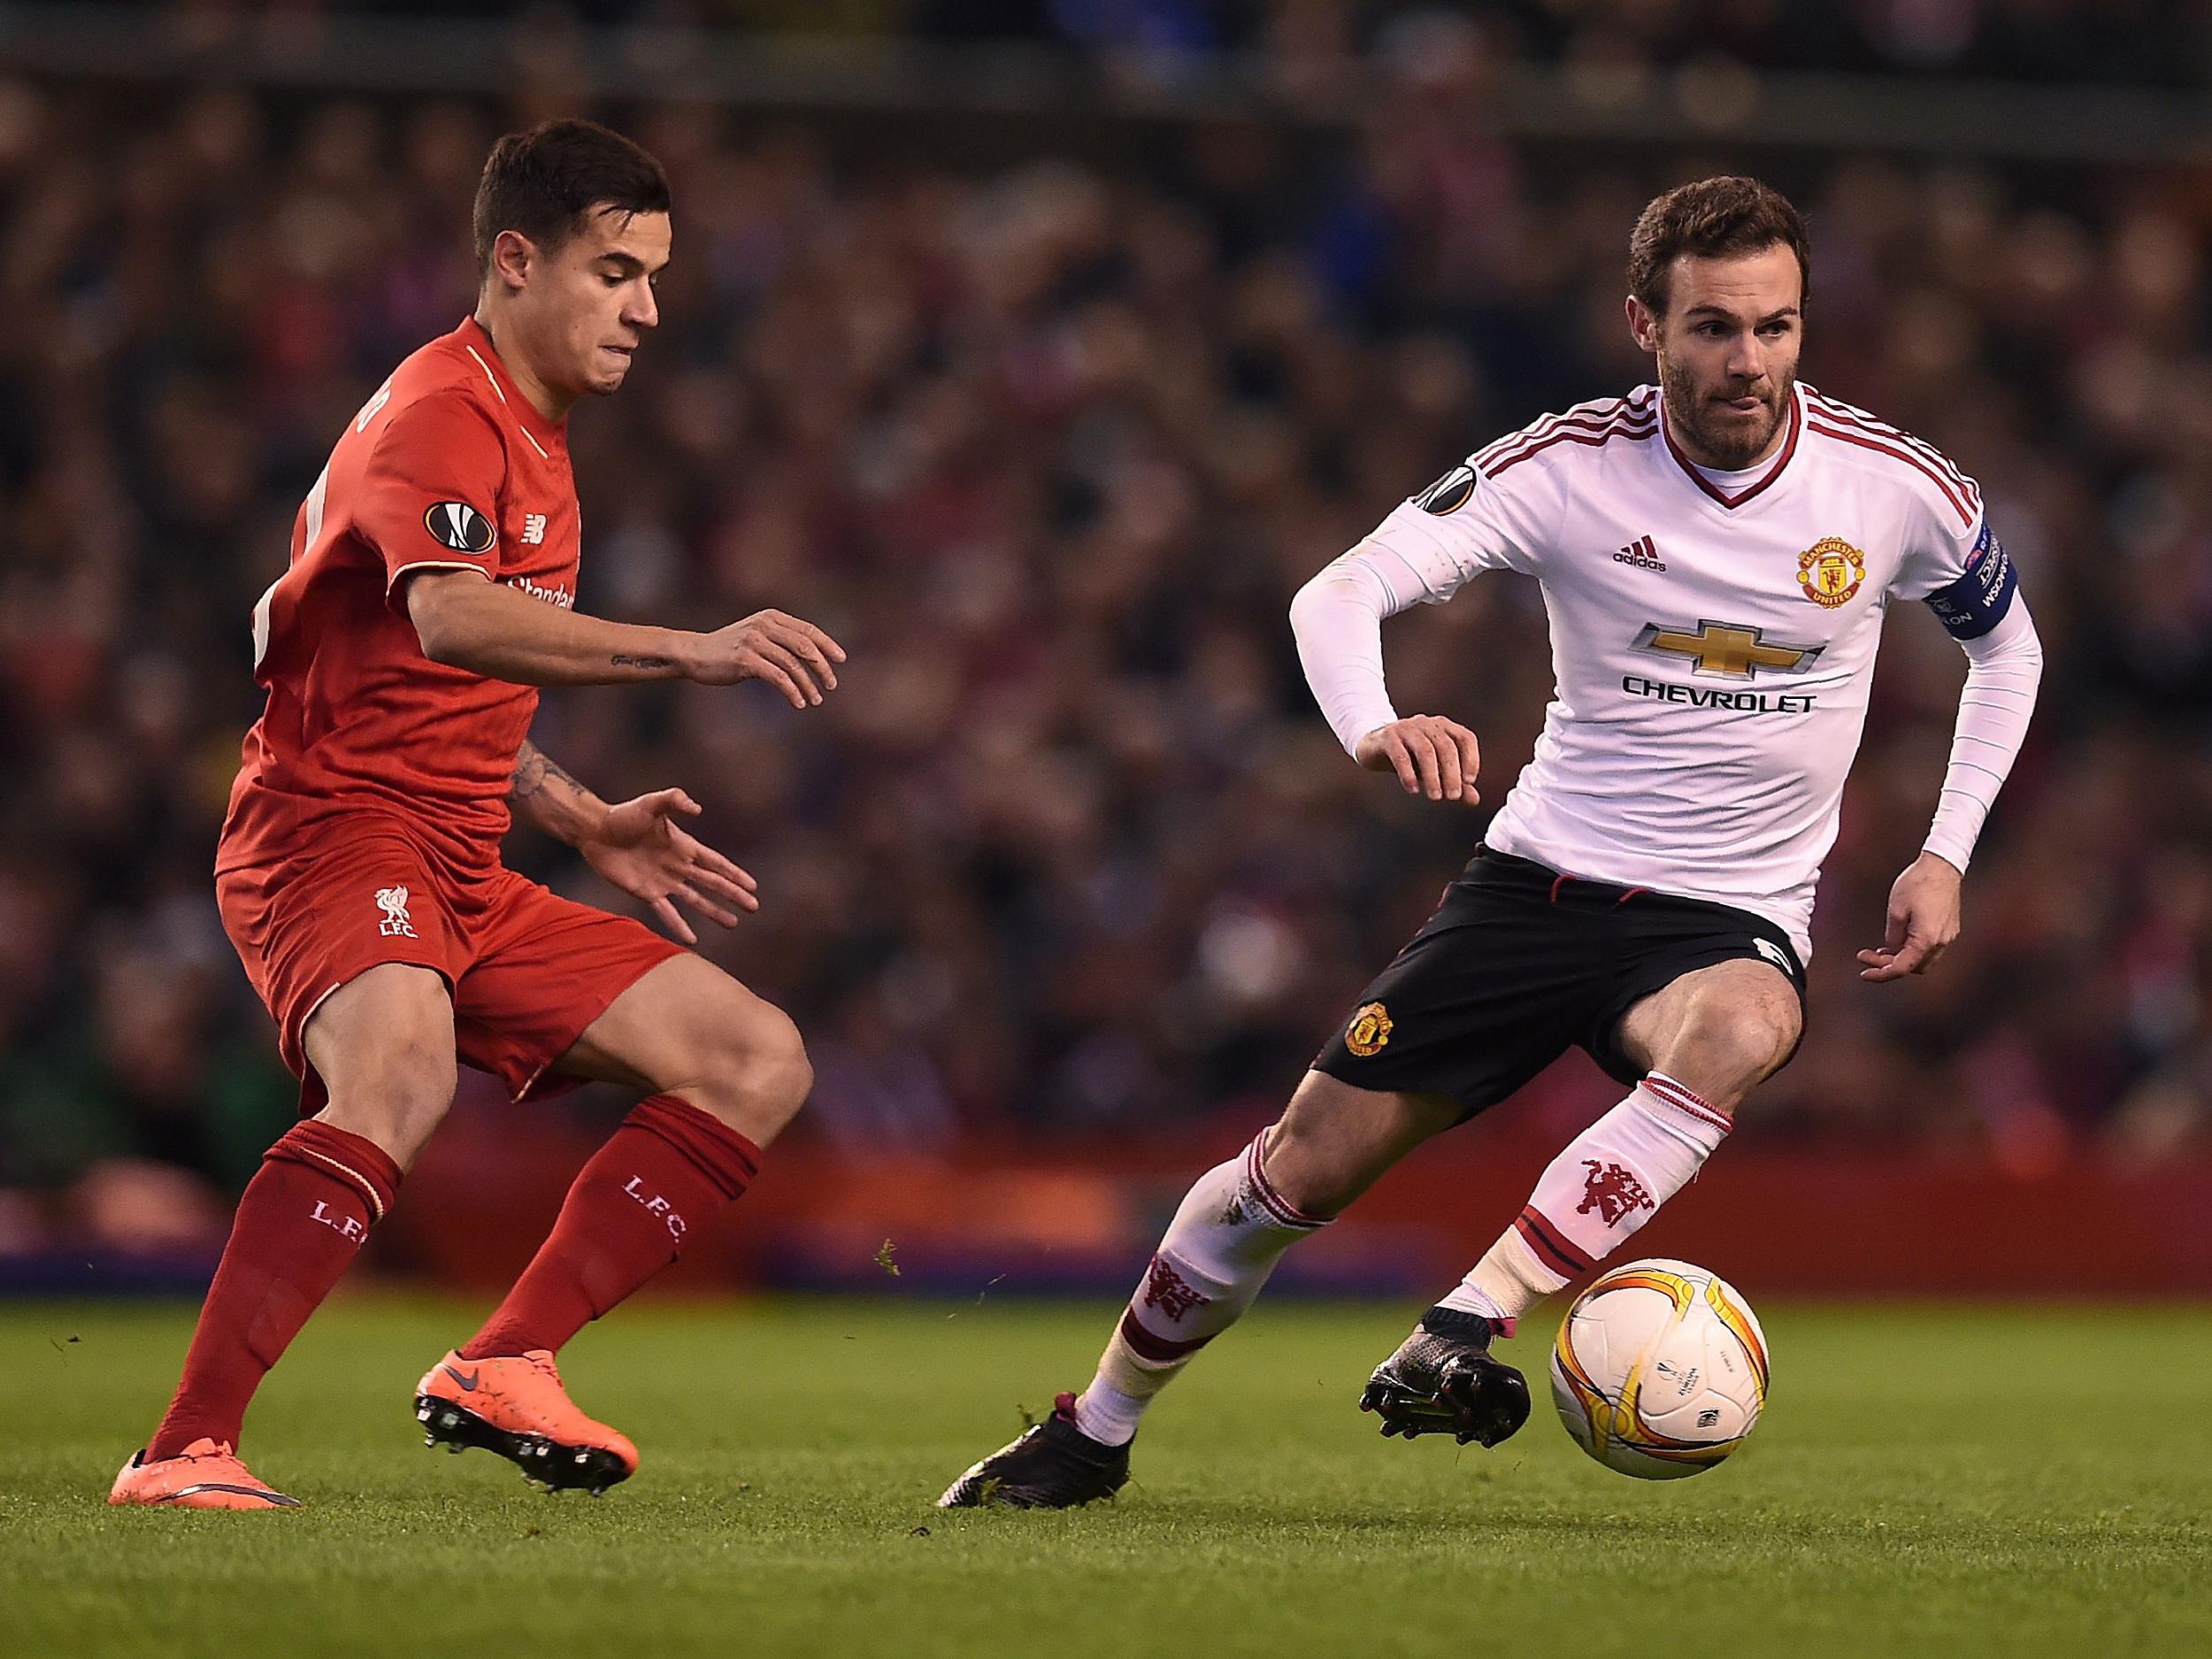 Juan Mata and Philippe Coutinho jostle for possession during the Europa League clash between Liverpool and Manchester United